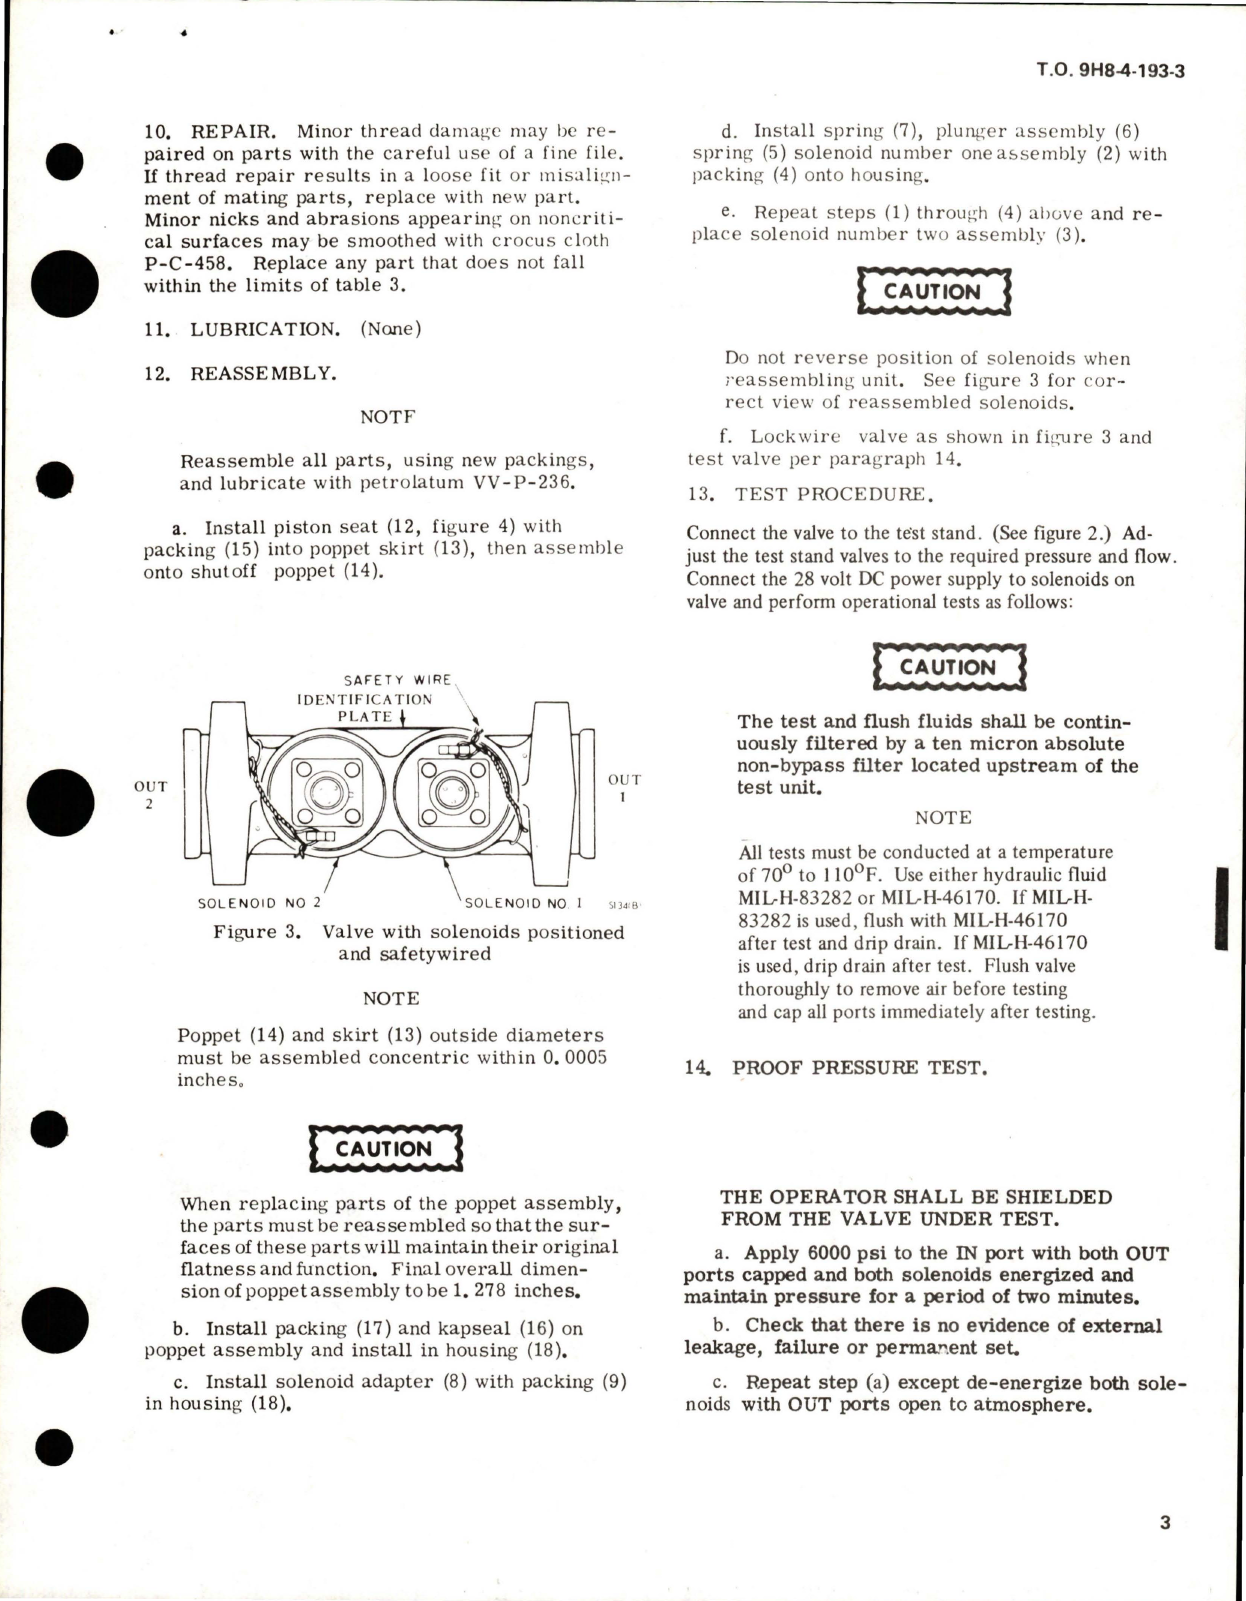 Sample page 5 from AirCorps Library document: Overhaul Instructions with Illustrated Parts Breakdown for Shutoff Valve - Part HP904200-16